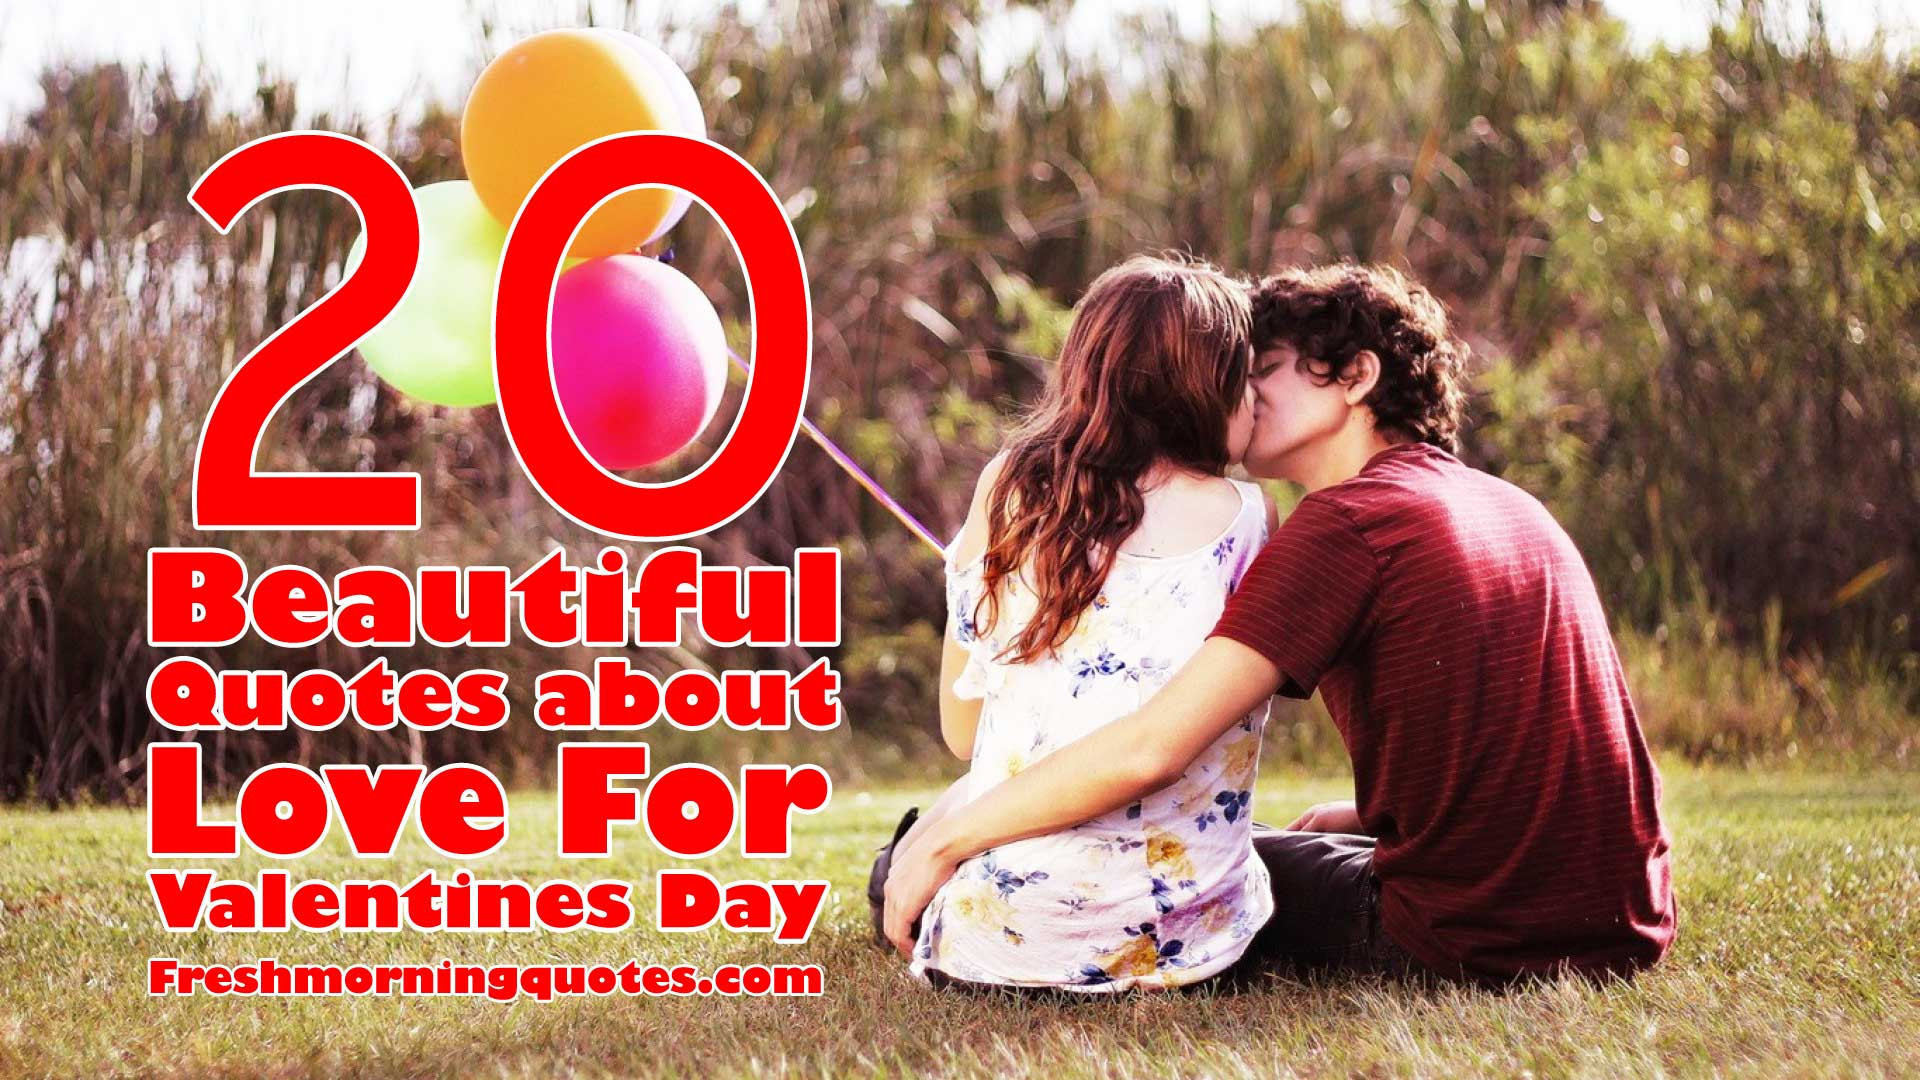 Quote For Valentines Day
 20 Beautiful Quotes about Love for Valentines Day